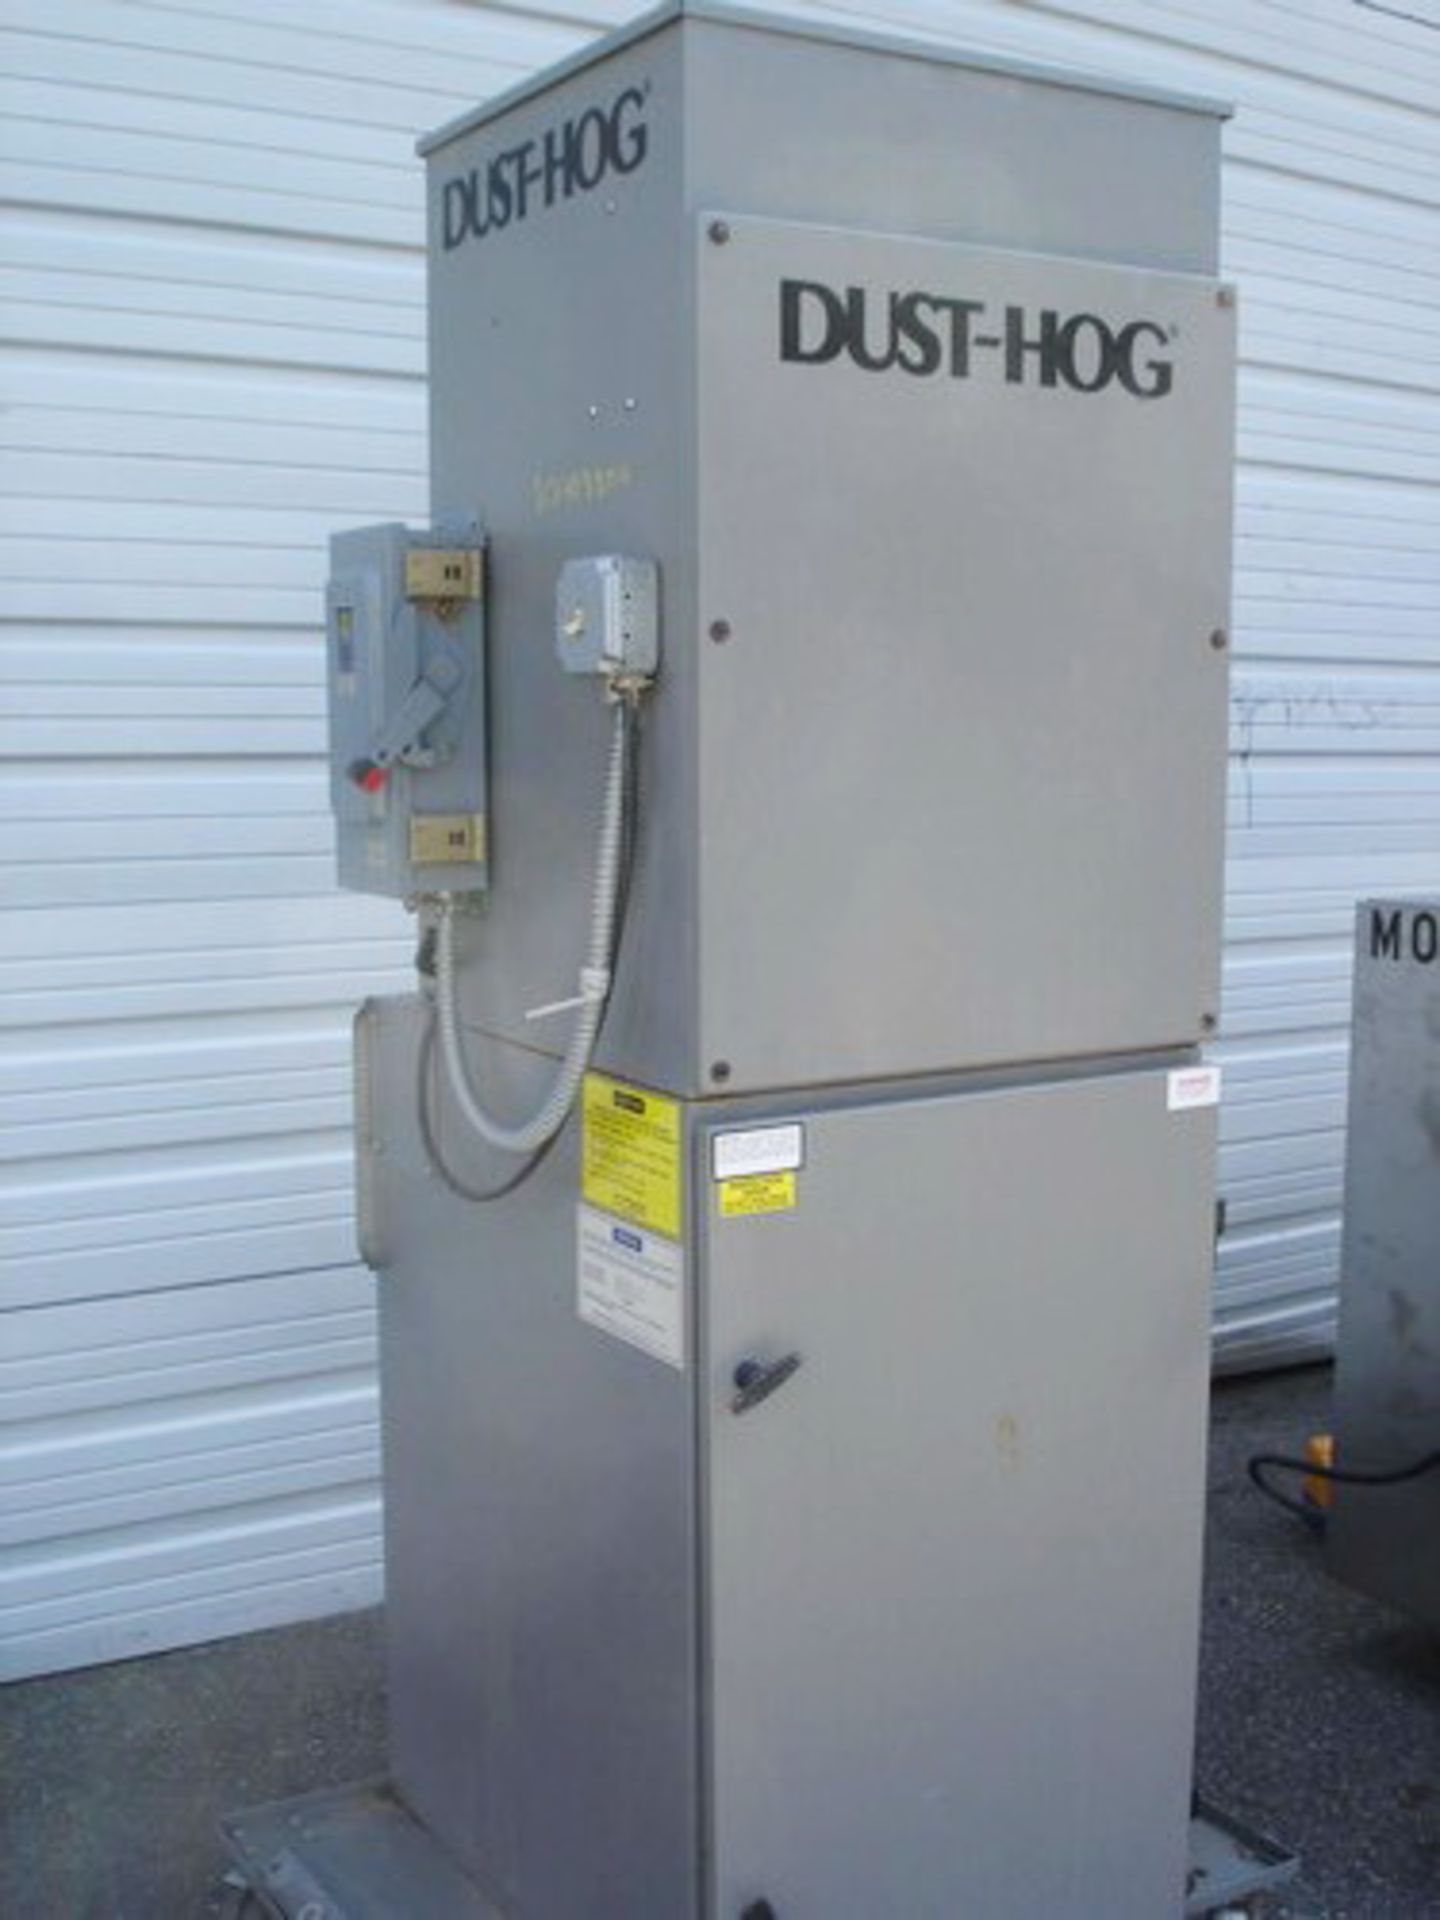 United Air Specialists (UAS) Dusthog Dust Collection System, Model Dusthog SC1700, S/N 60046570 - Image 2 of 5